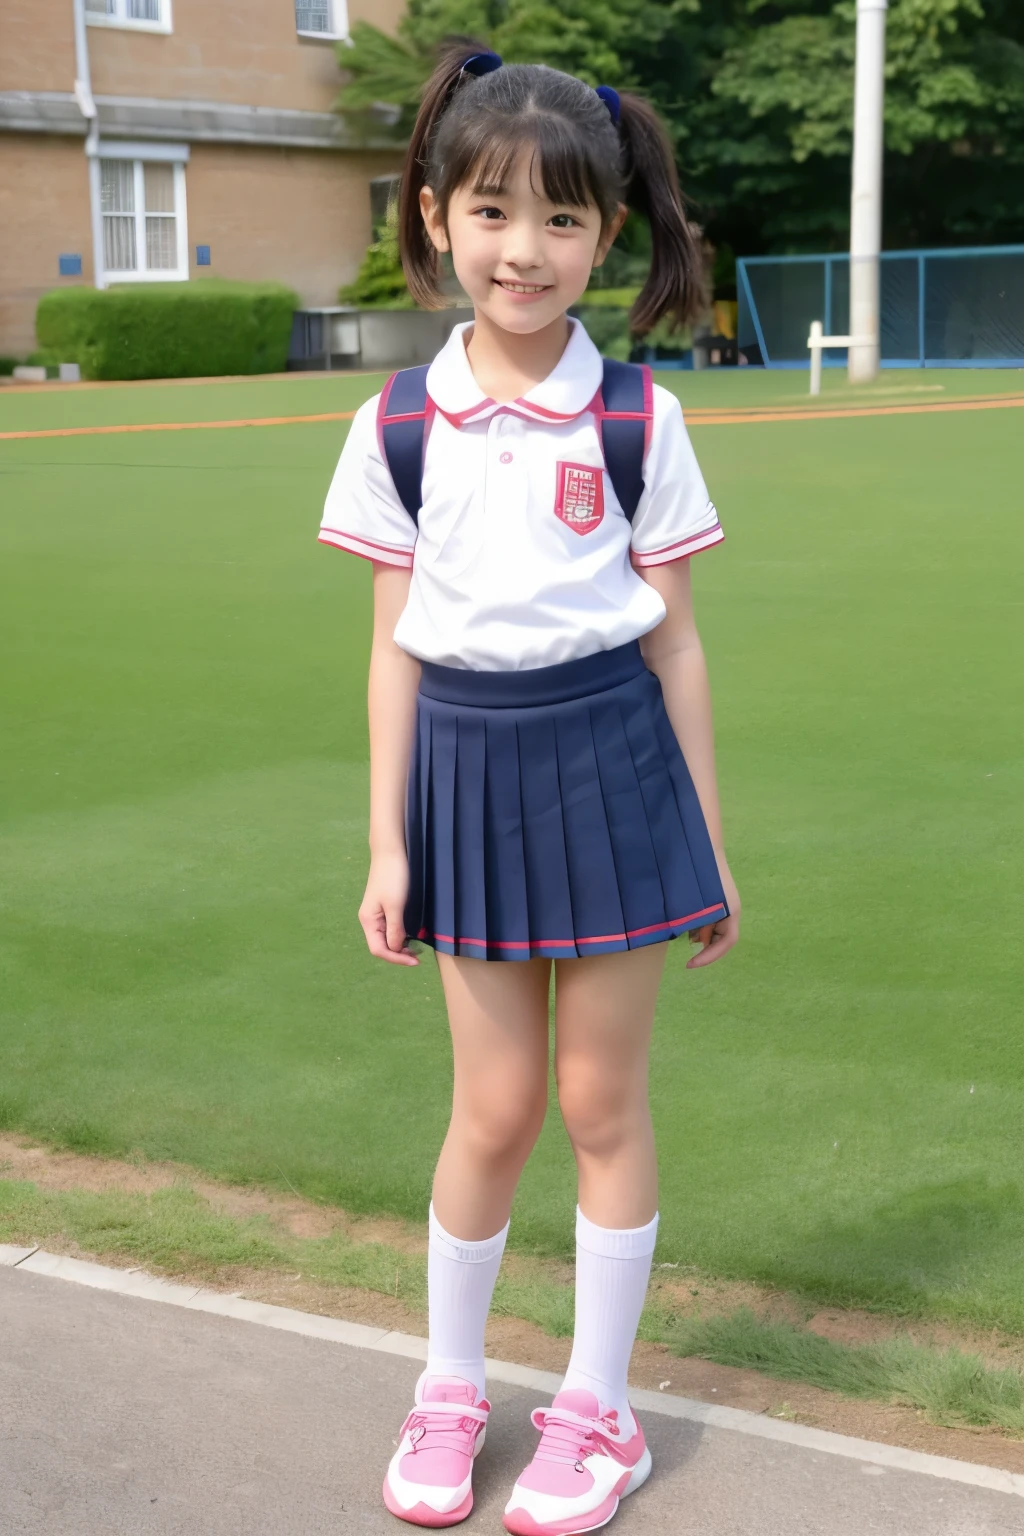 ((highest quality)), ((masterpiece)), (be familiar with), Perfect Face,Japanese,9 years old,Girl,cute,Primary school students,Private elementary school,Gym suit,Bloomers,Schoolyard